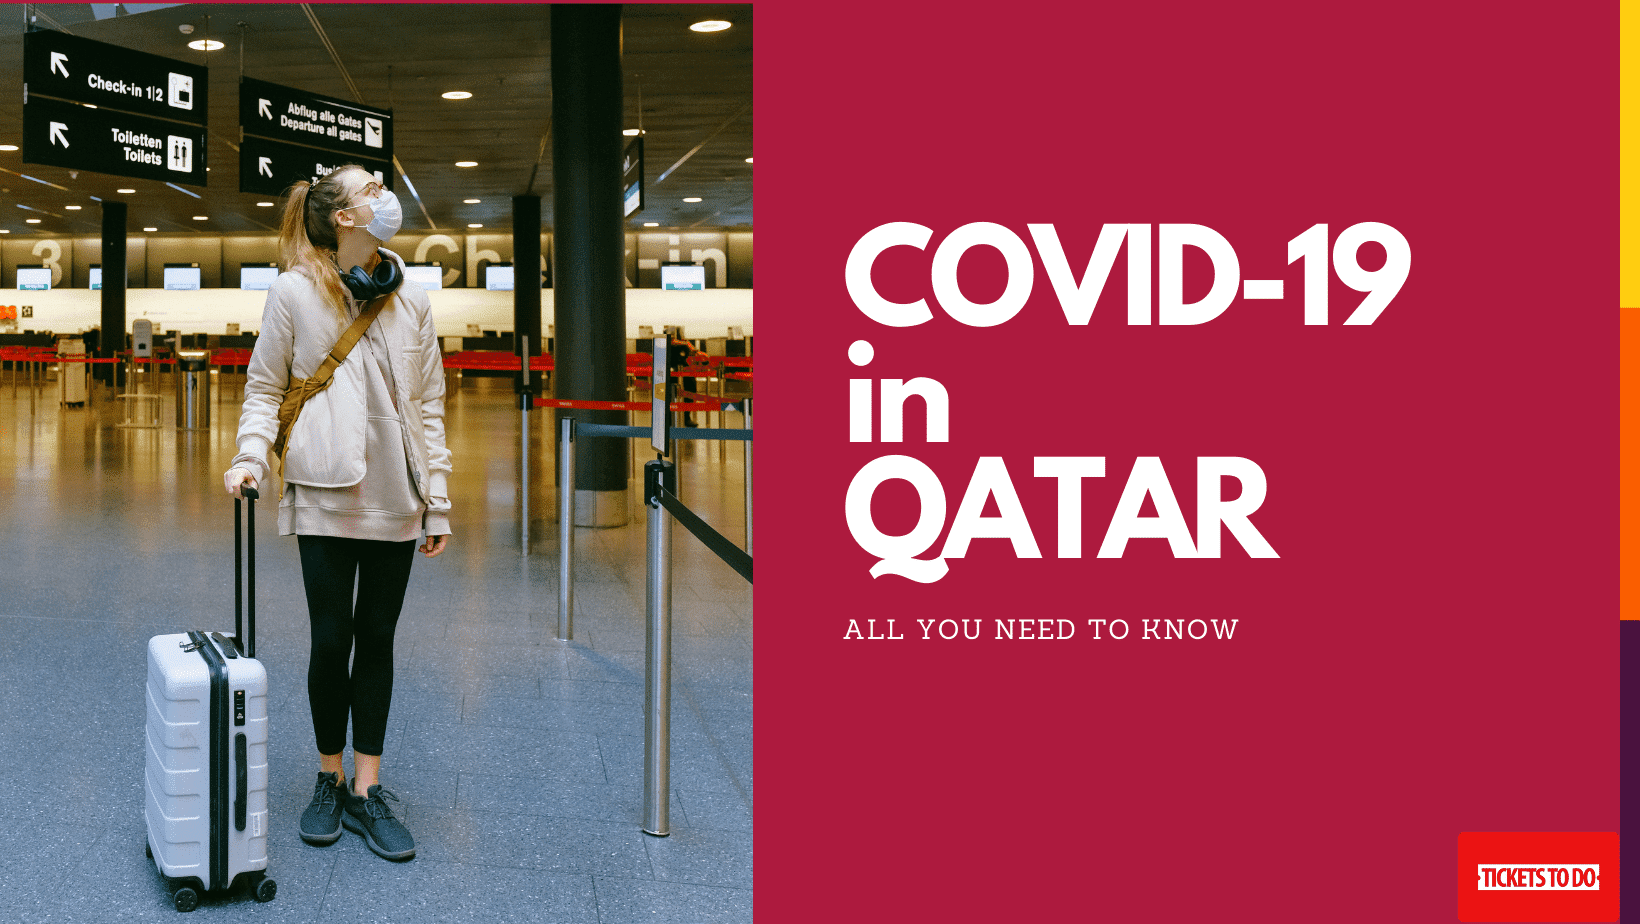 Traveling to Qatar? Here’s all you need to know about COVID-19